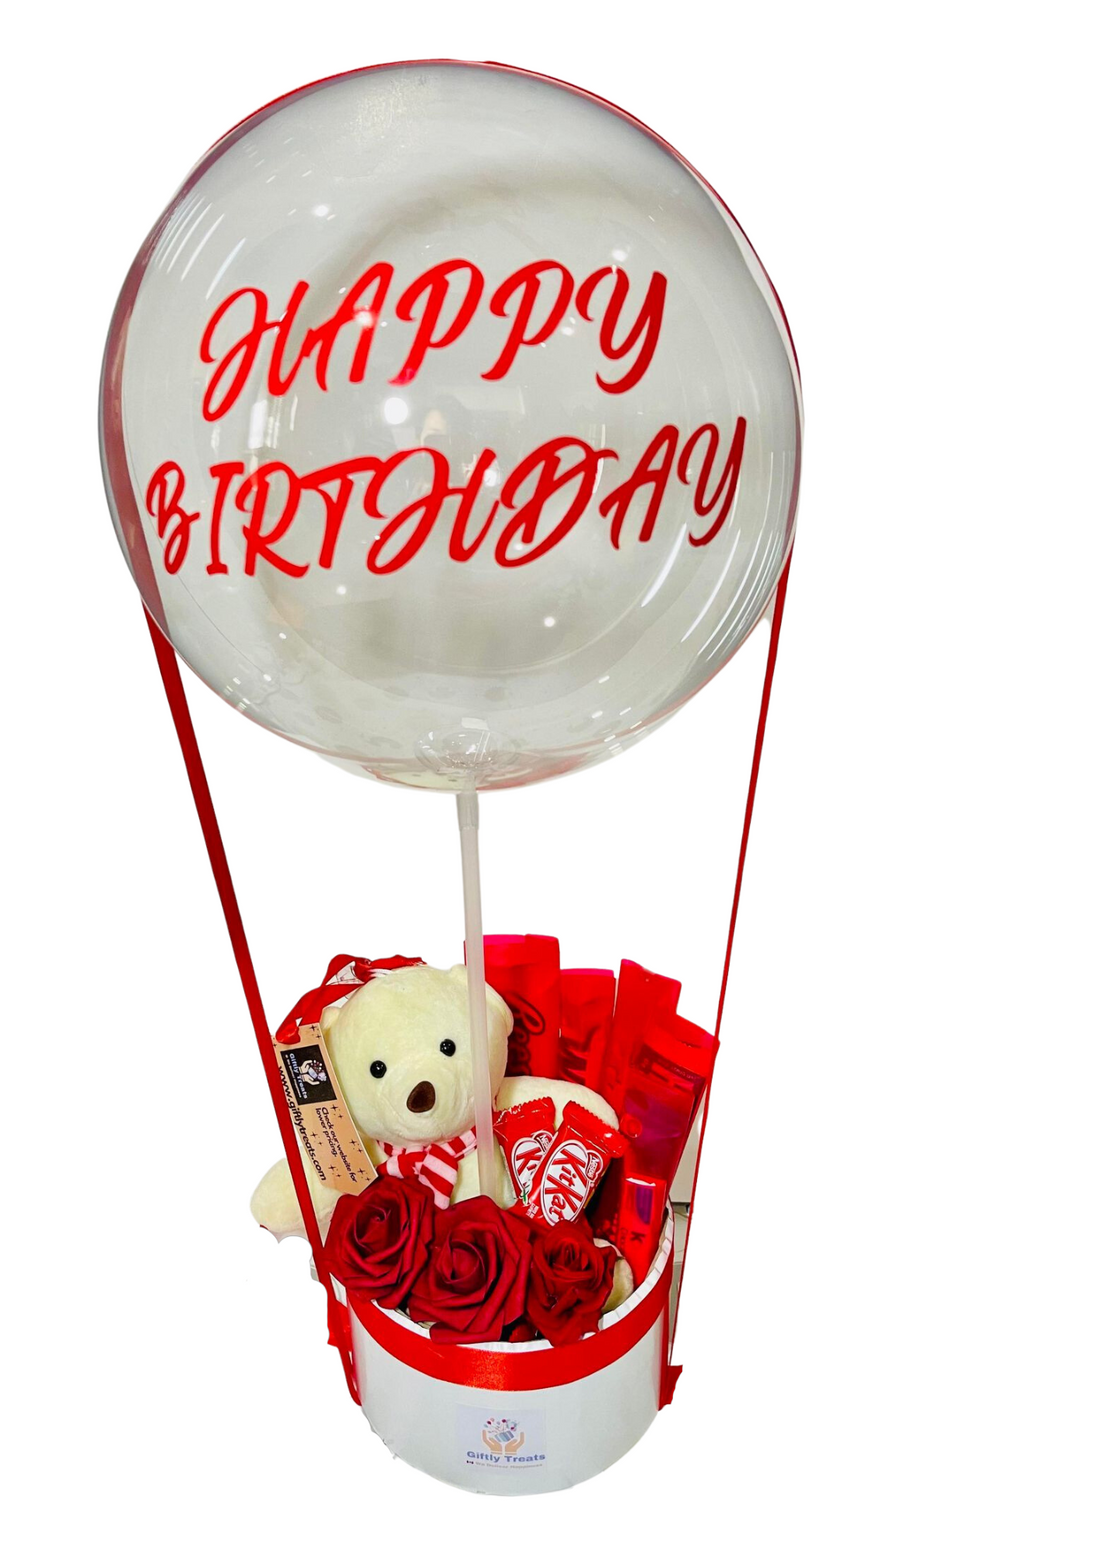 Birthday Gift for her. Teddy Bear, Canadian chocolates sold by giftly treats. 